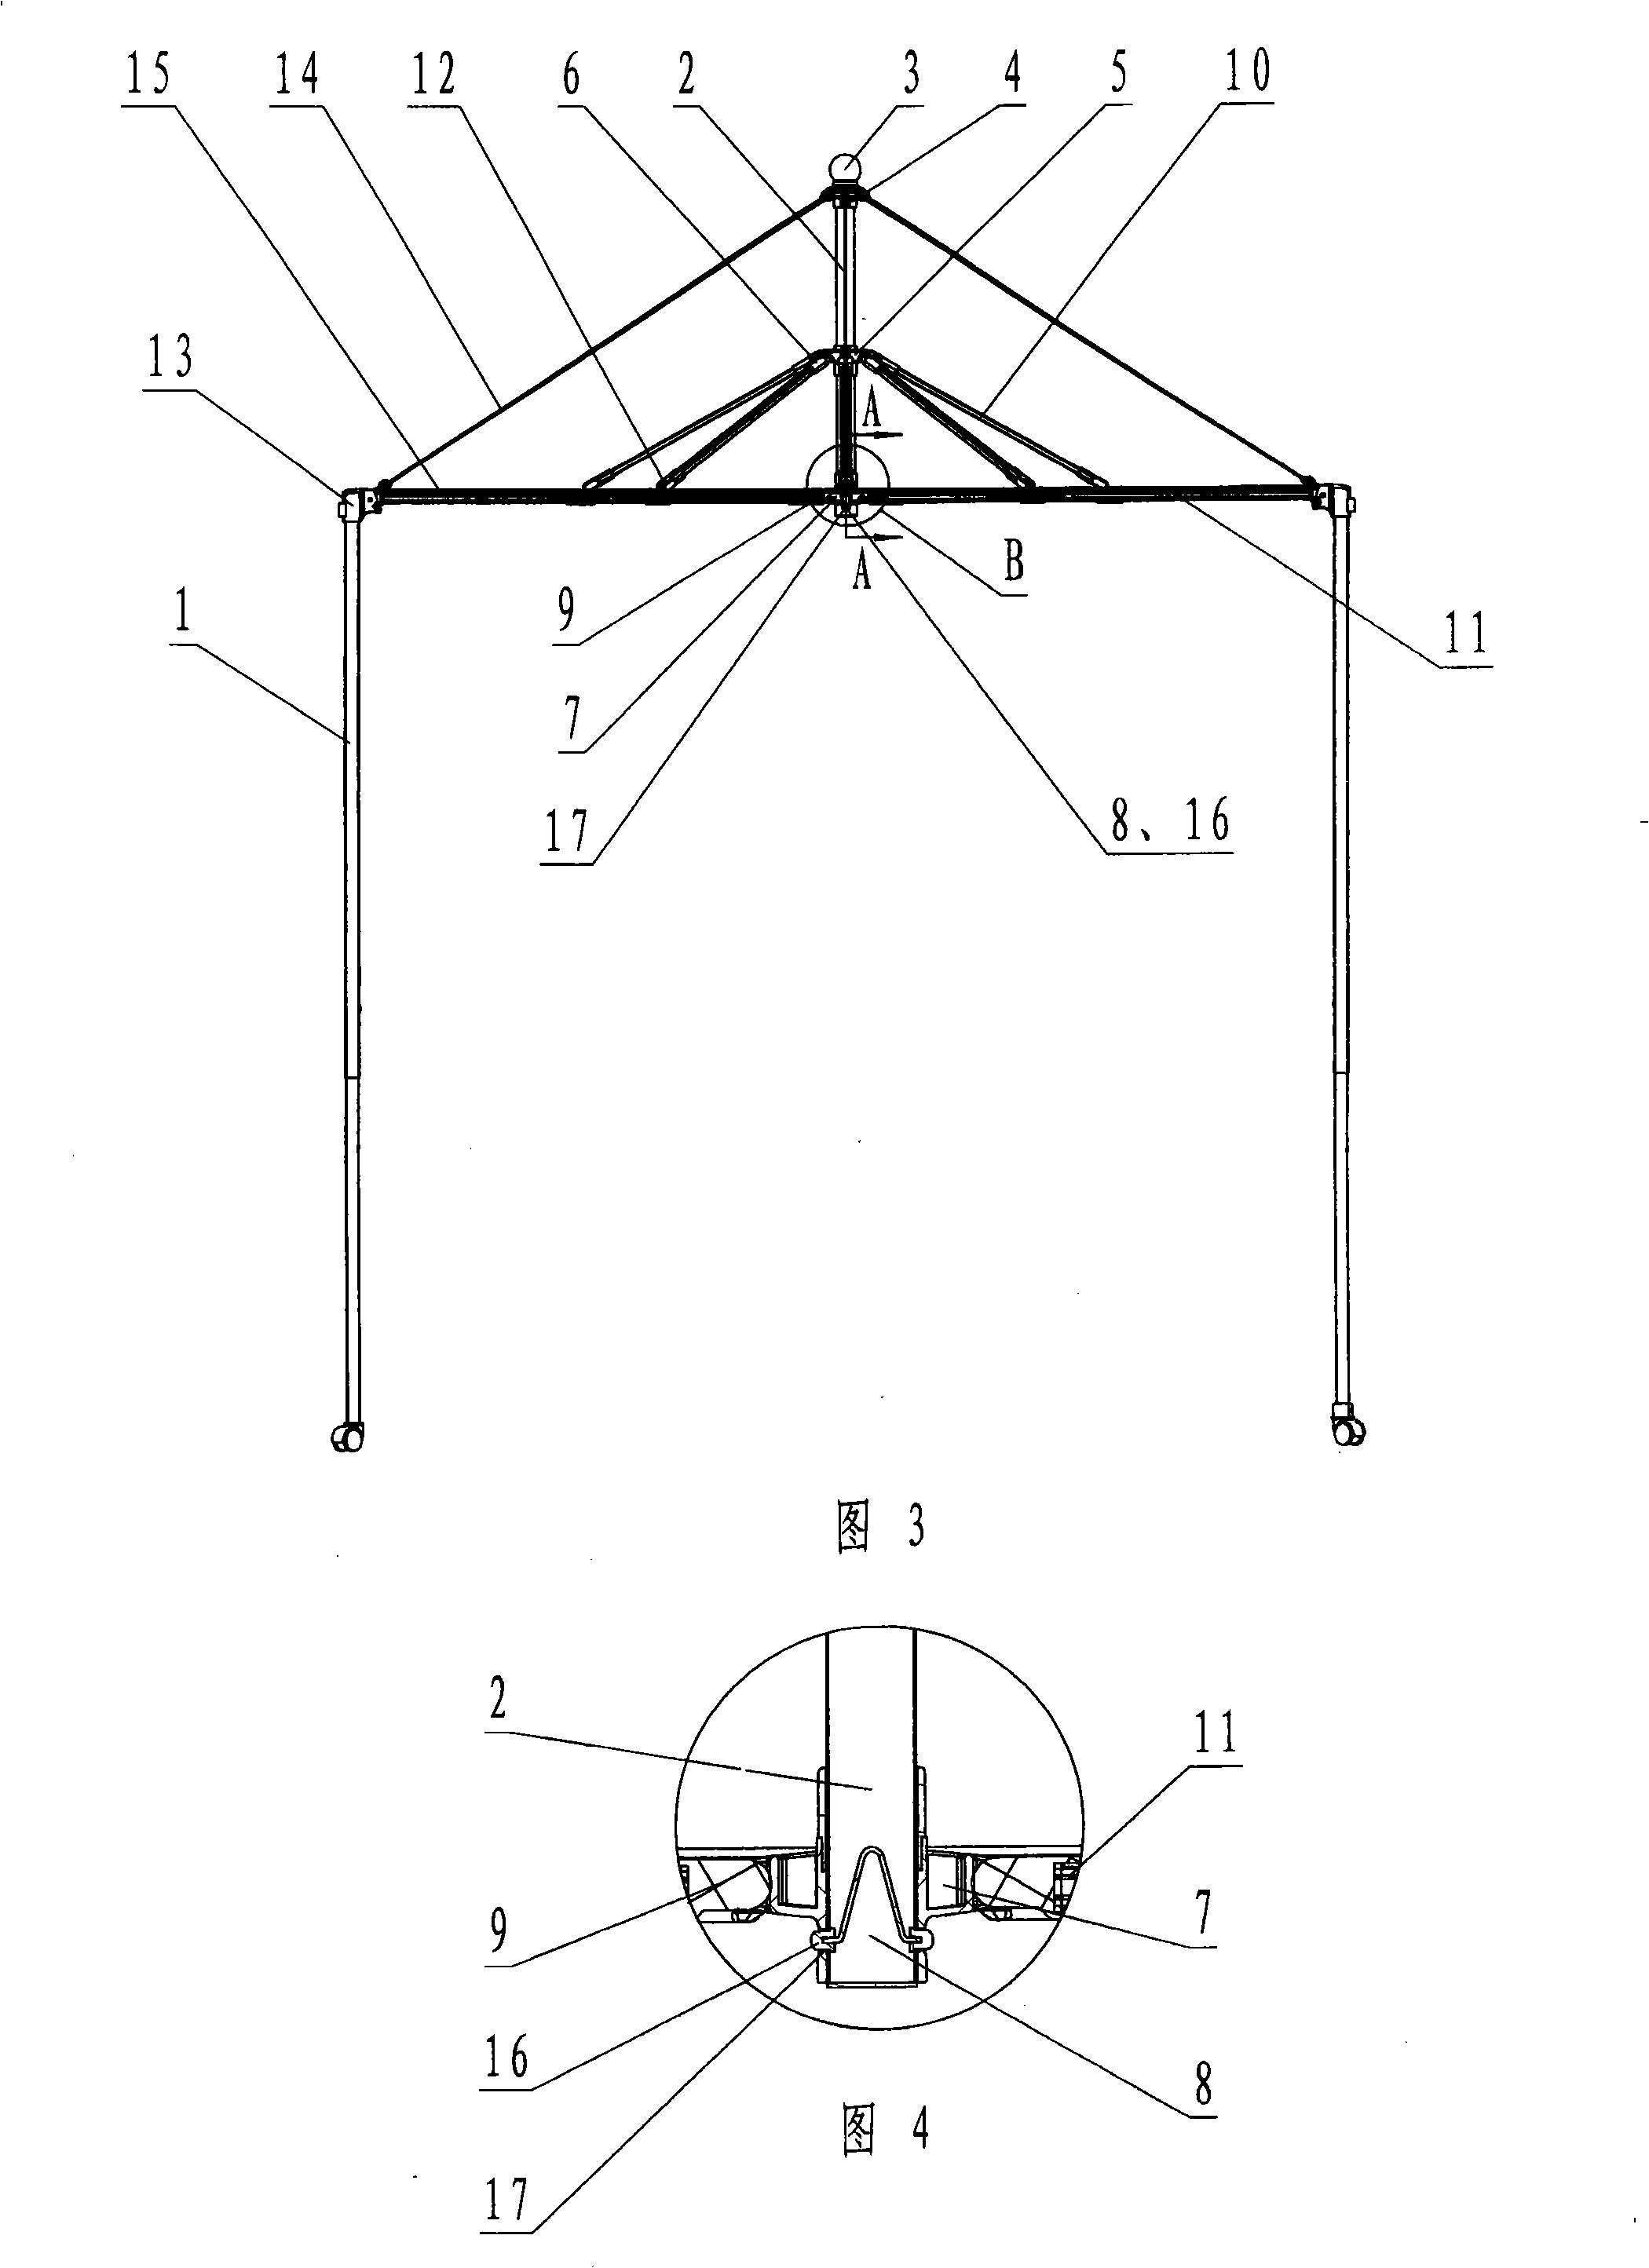 Folding stay-supported tent frame